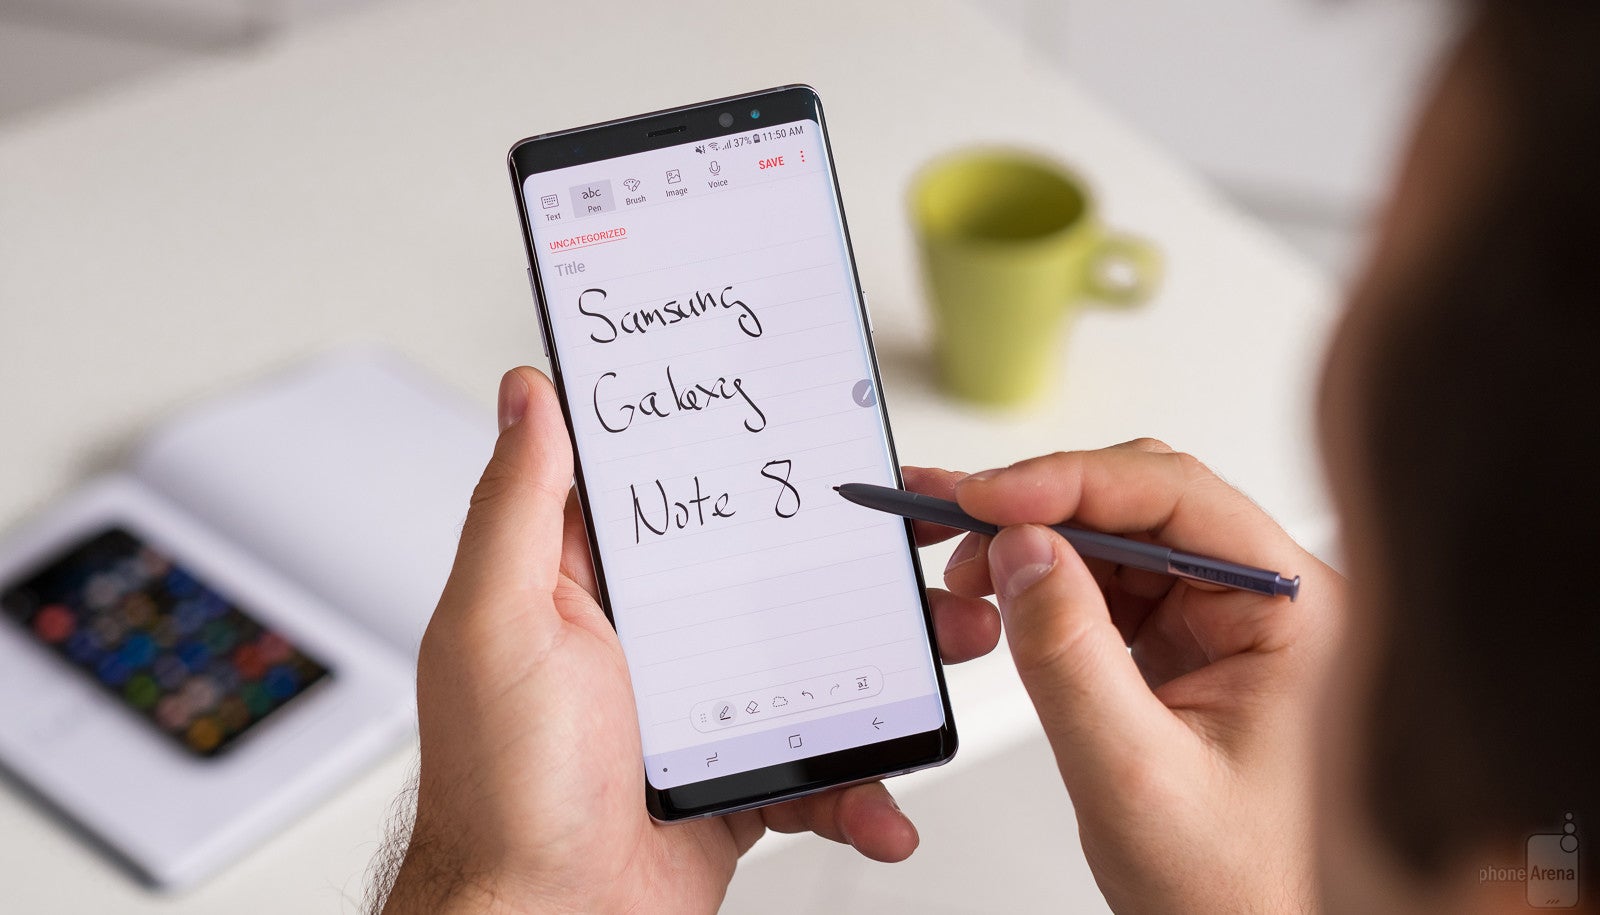 Samsung Galaxy Note 8 Q&A: Your questions answered!